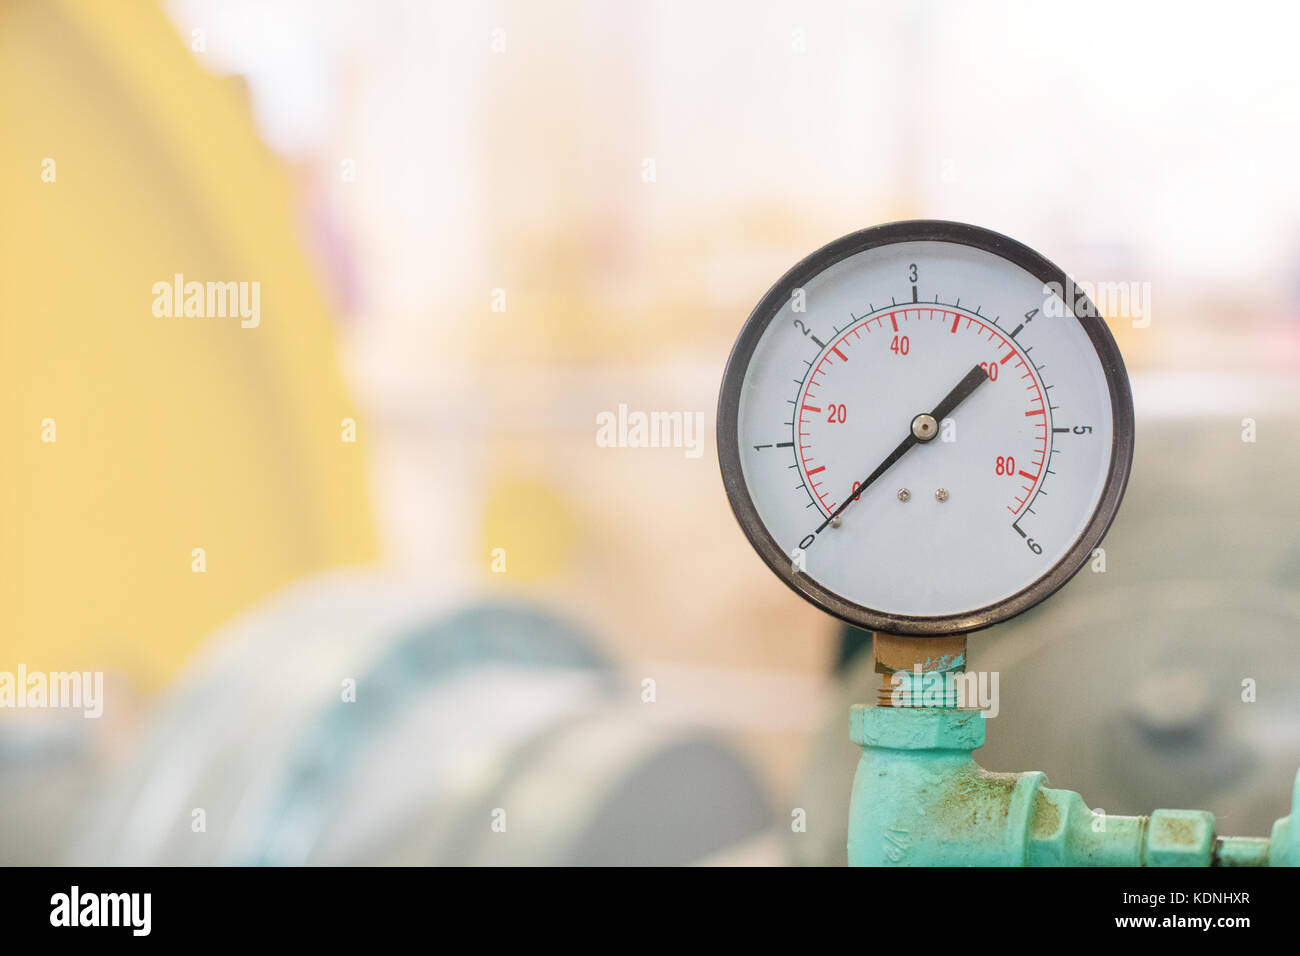 Small Manometer , round Industrial Thermometer DOF Stock Photo